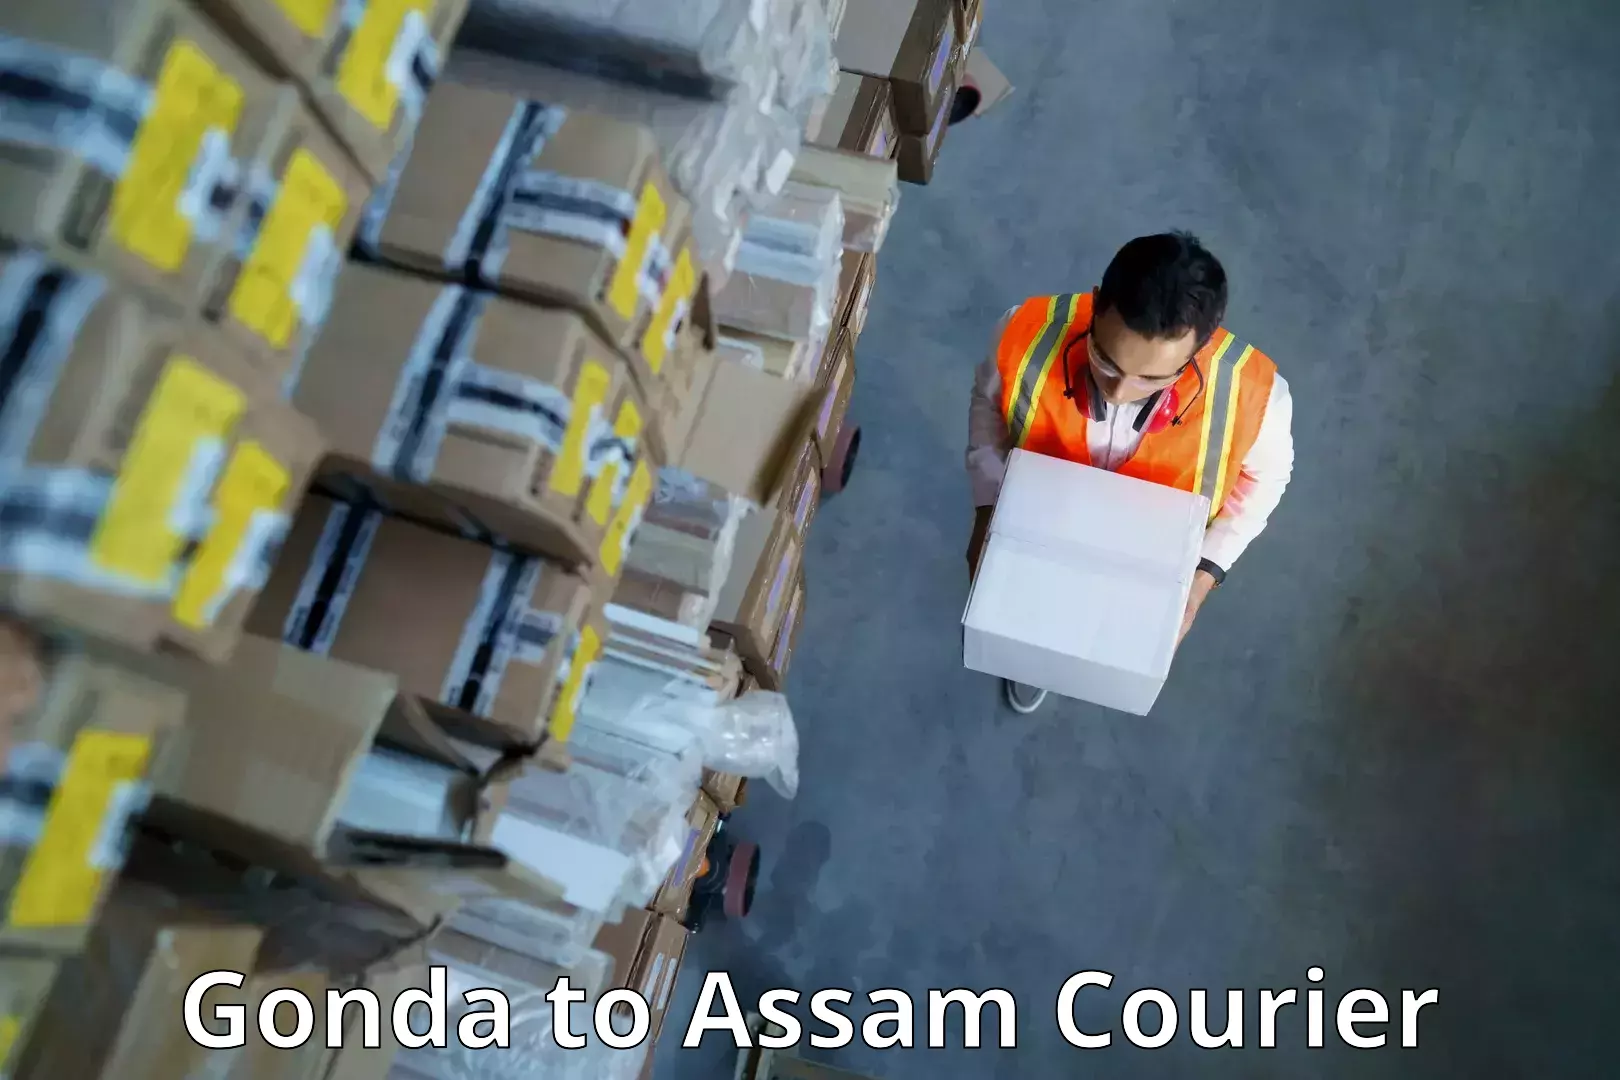 Multi-national courier services Gonda to Assam